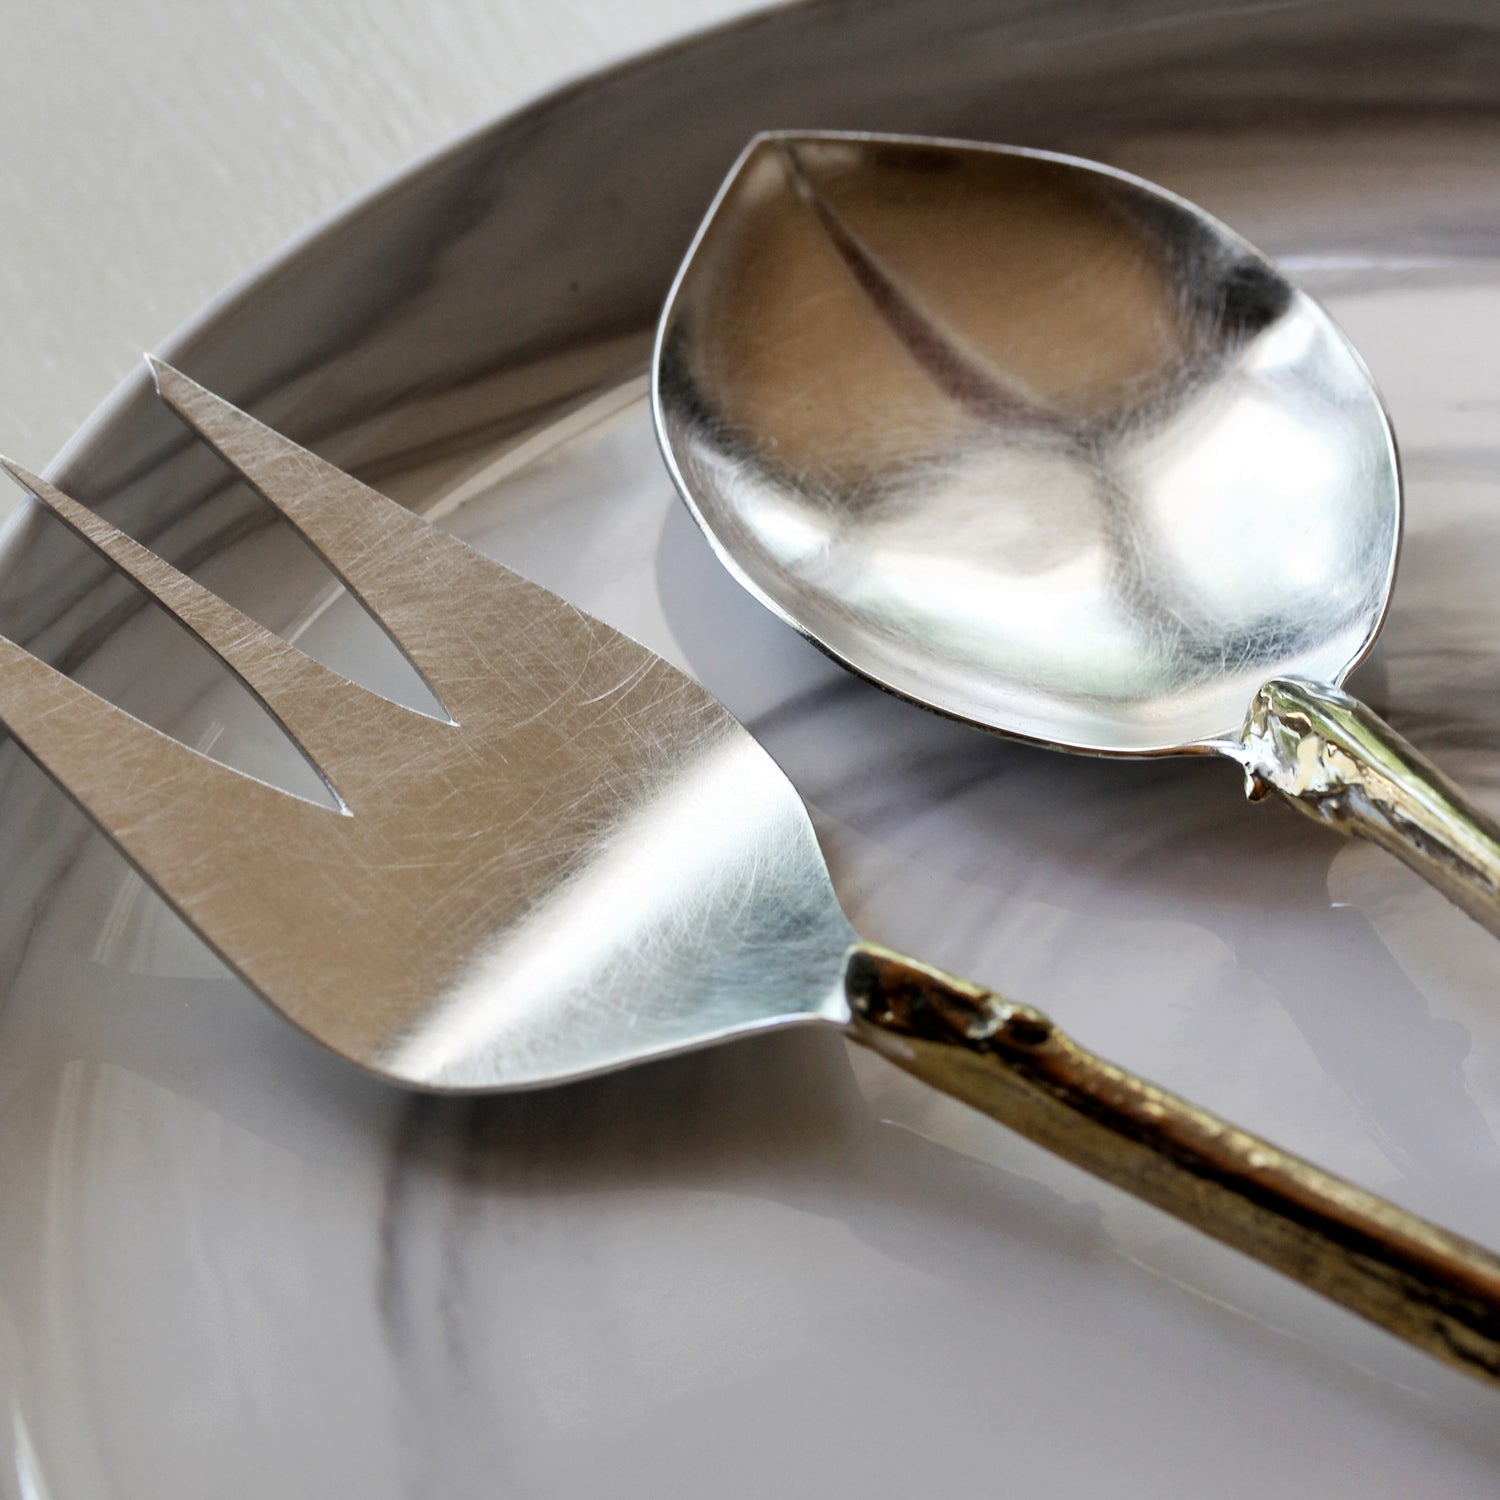 Serving Set, handmade in sterling silver and brass, cast stems from Swamp Rabbit Trail in Greenville SC, detail of spoon and fork